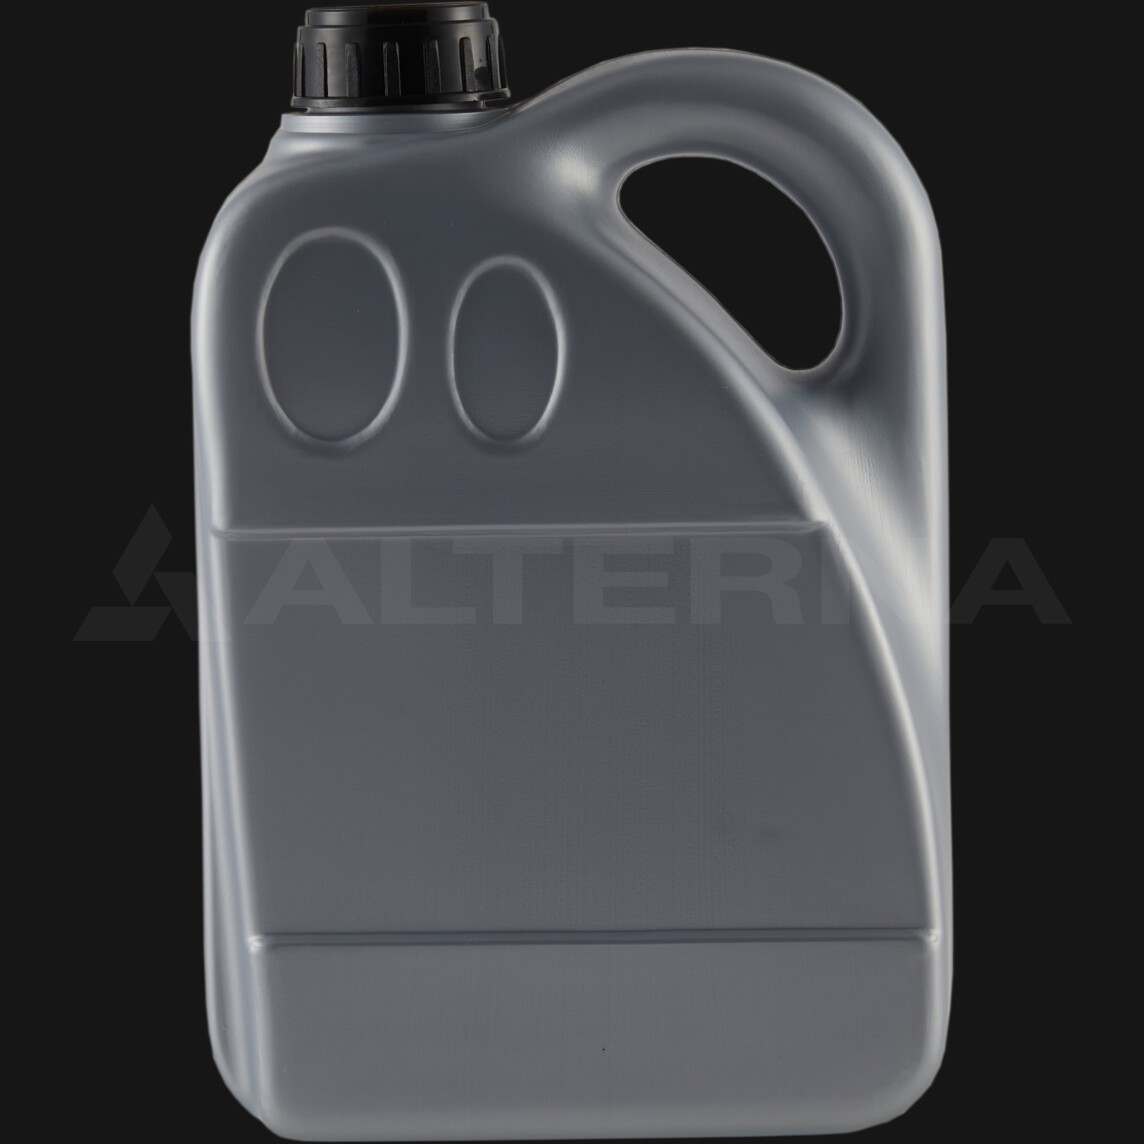 4 Liter HDPE Motor Oil Jerry Can with 50 mm Alu. Seal Cap